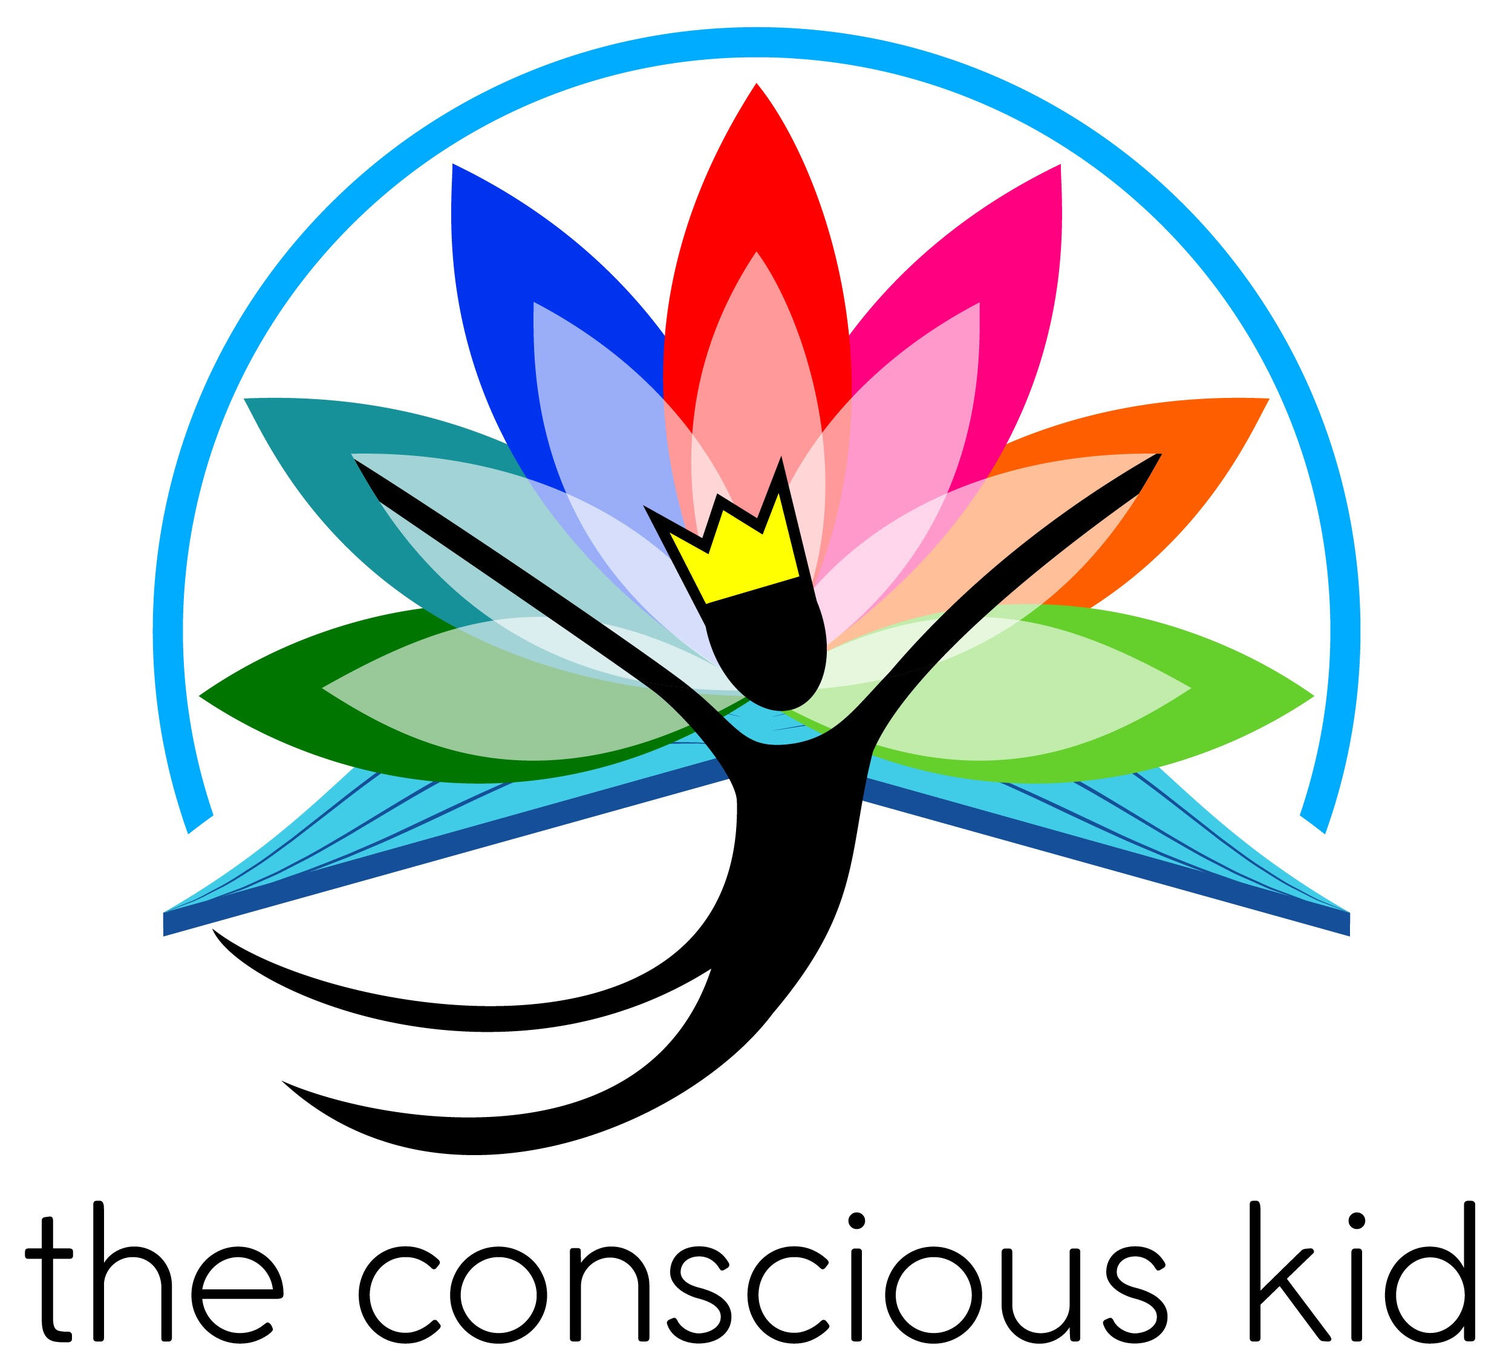 www.theconsciouskid.org